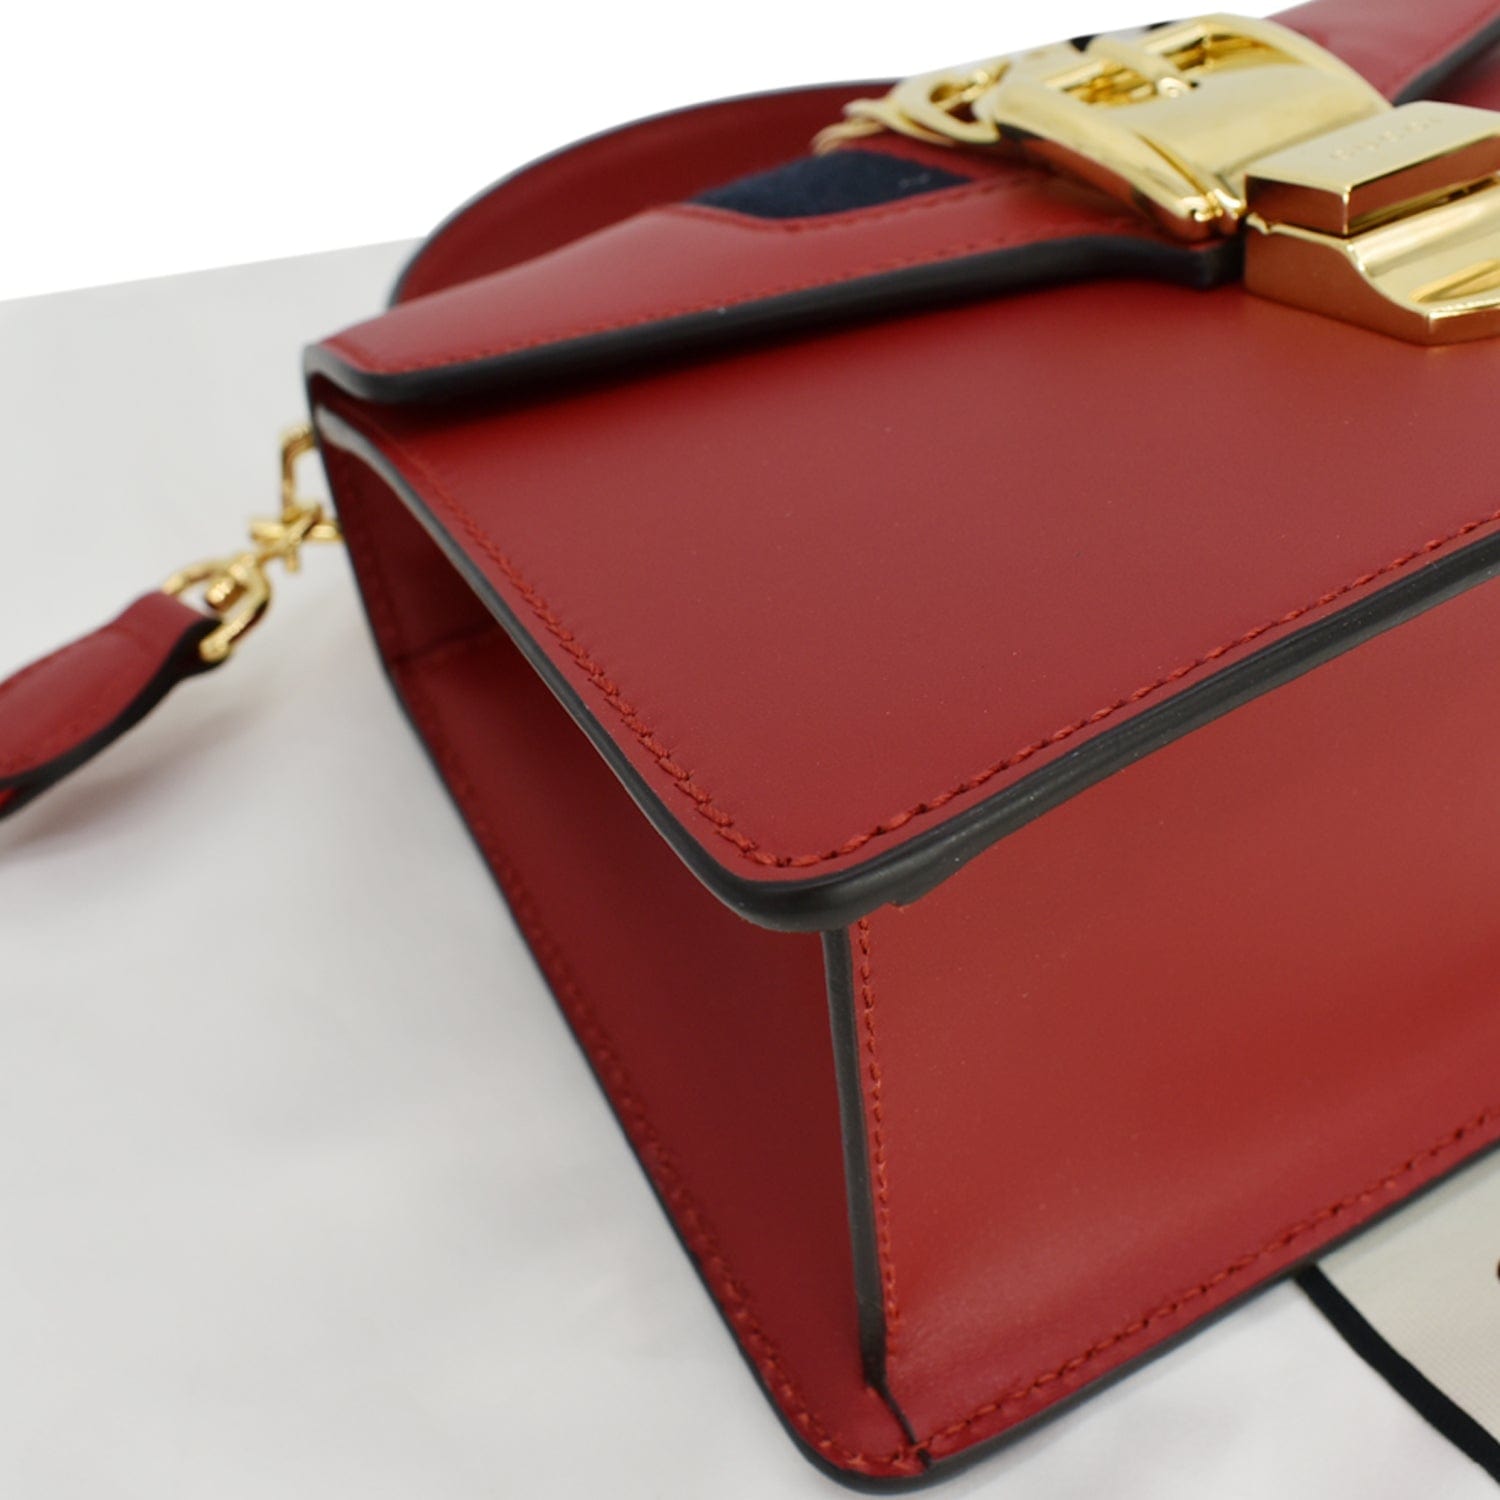 Hibiscus Hand-painted Leather Crossbody Bag